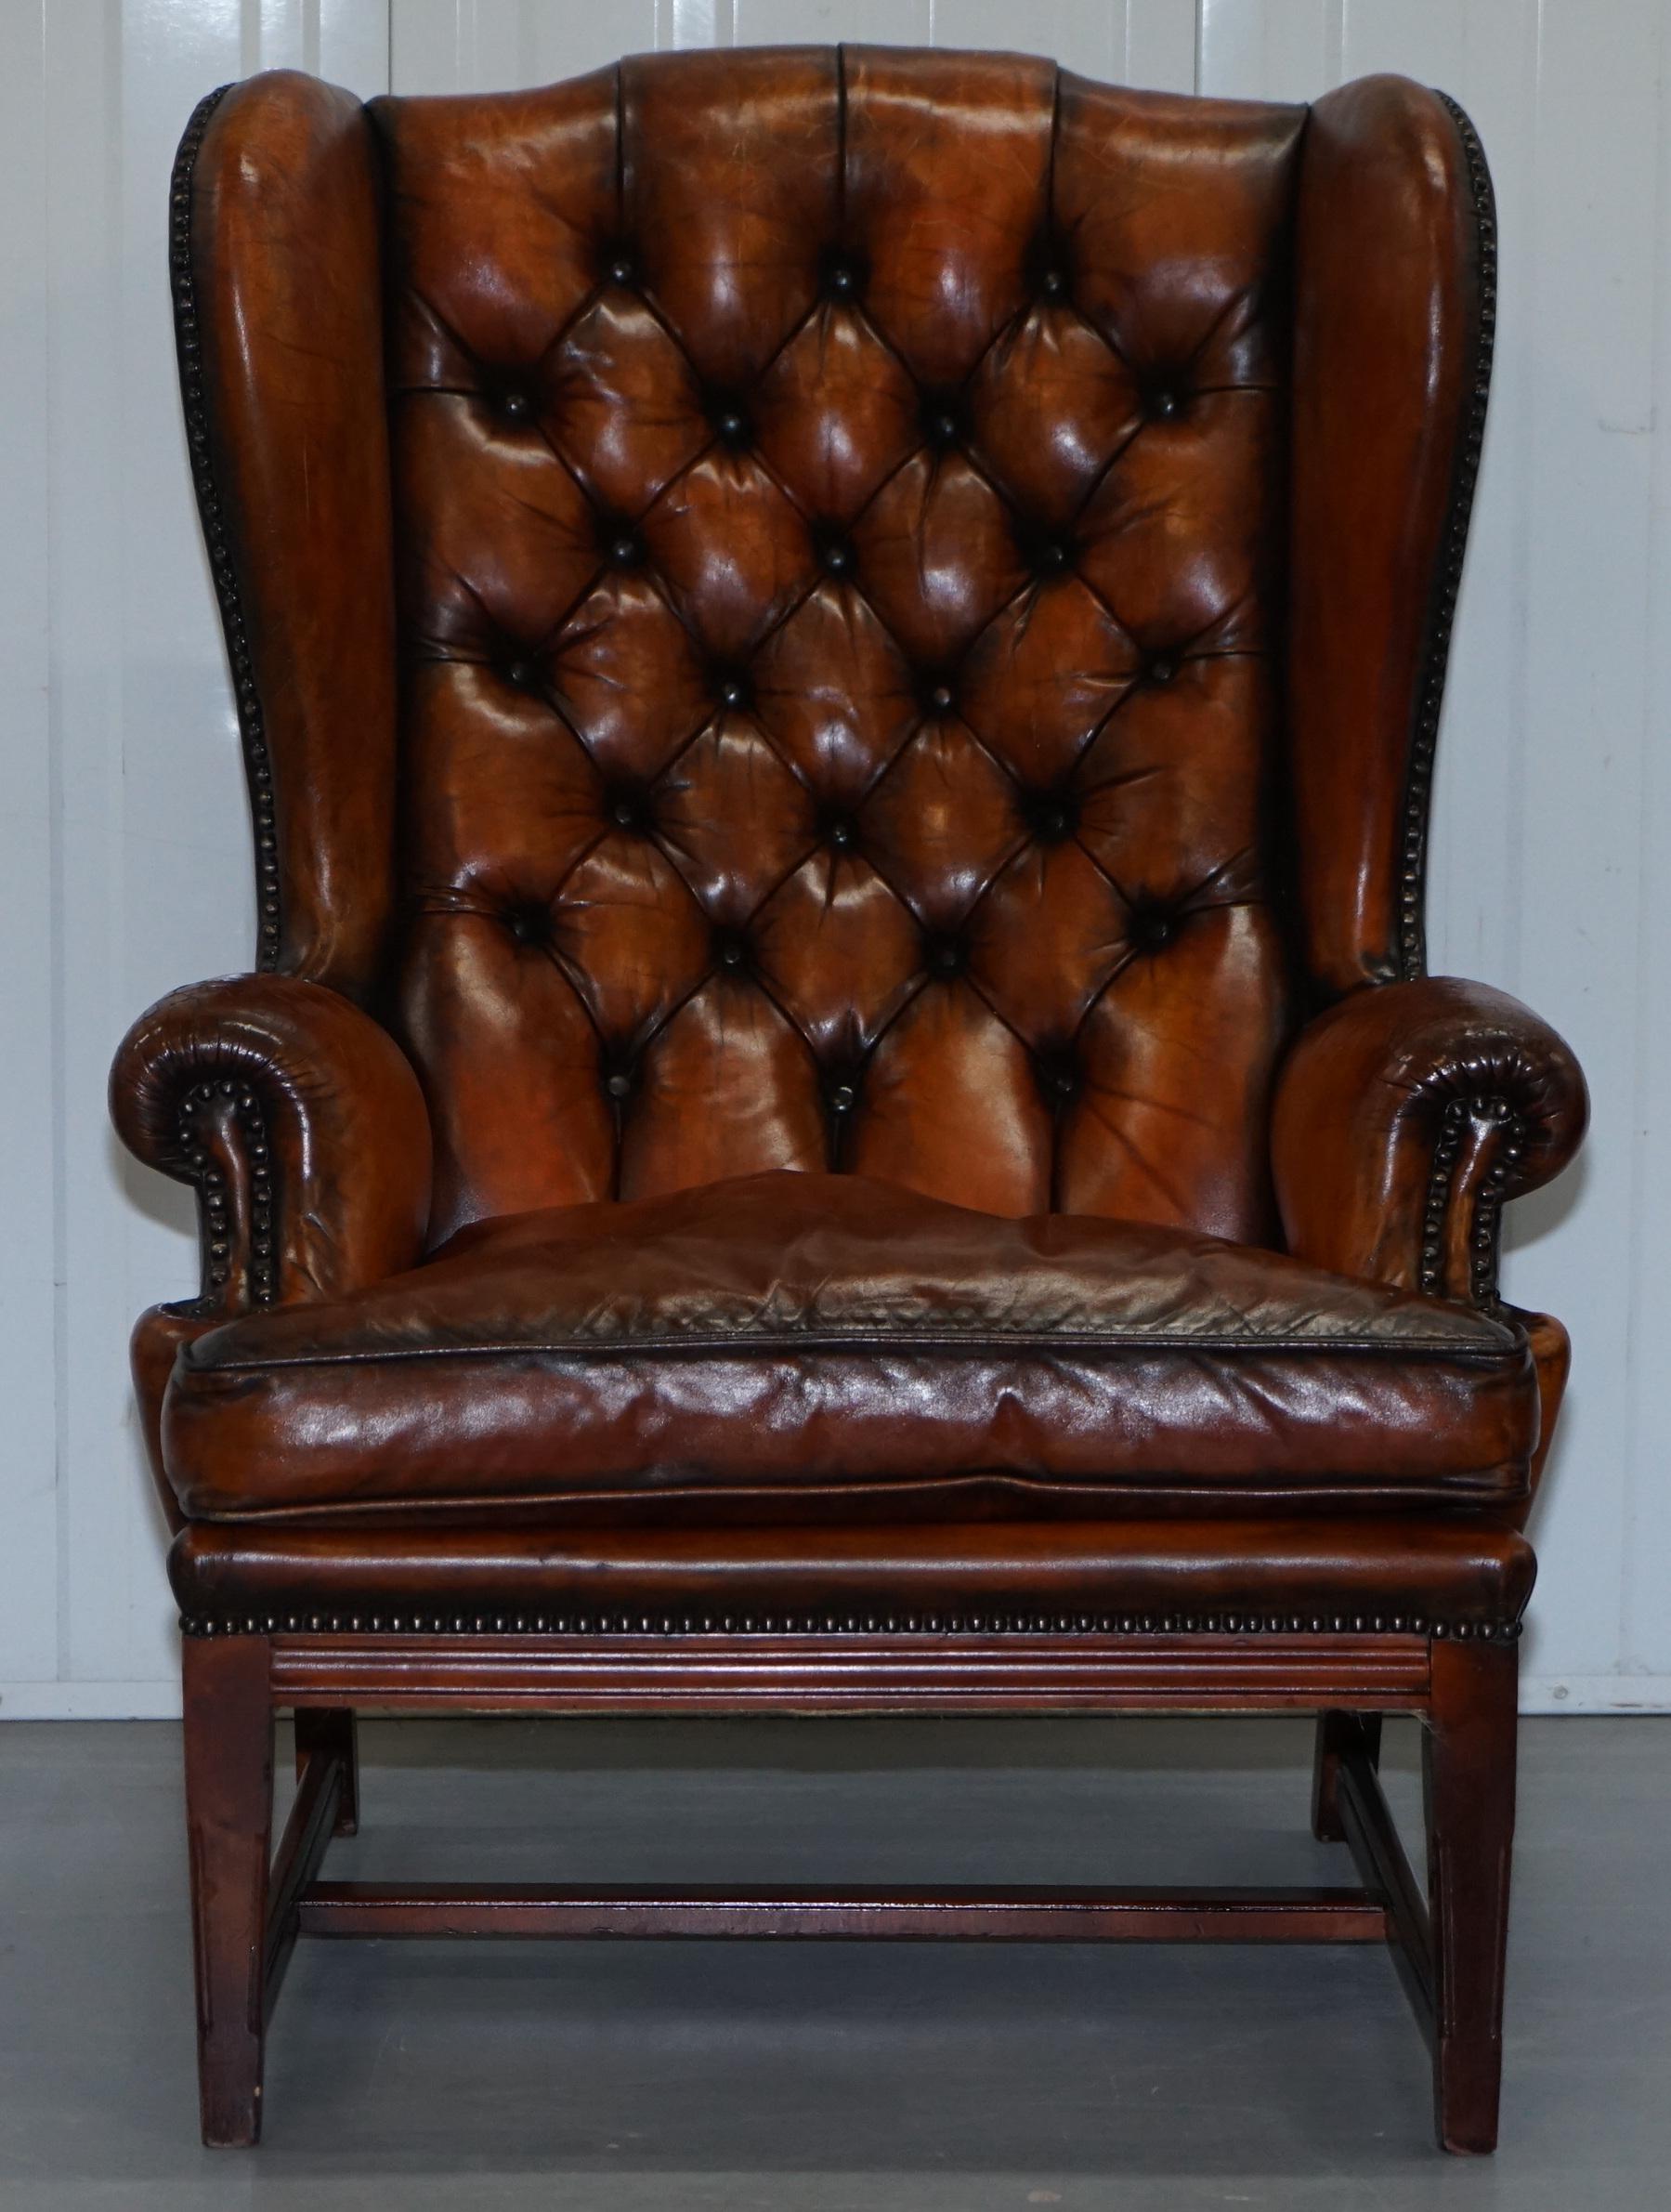 We are delighted to offer for sale this stunning fully restored Chesterfield Whisky brown leather wingback armchair with feather filled cushion

This is one of the nicer wingback chairs we have in stock, the colour is rich and work and has a